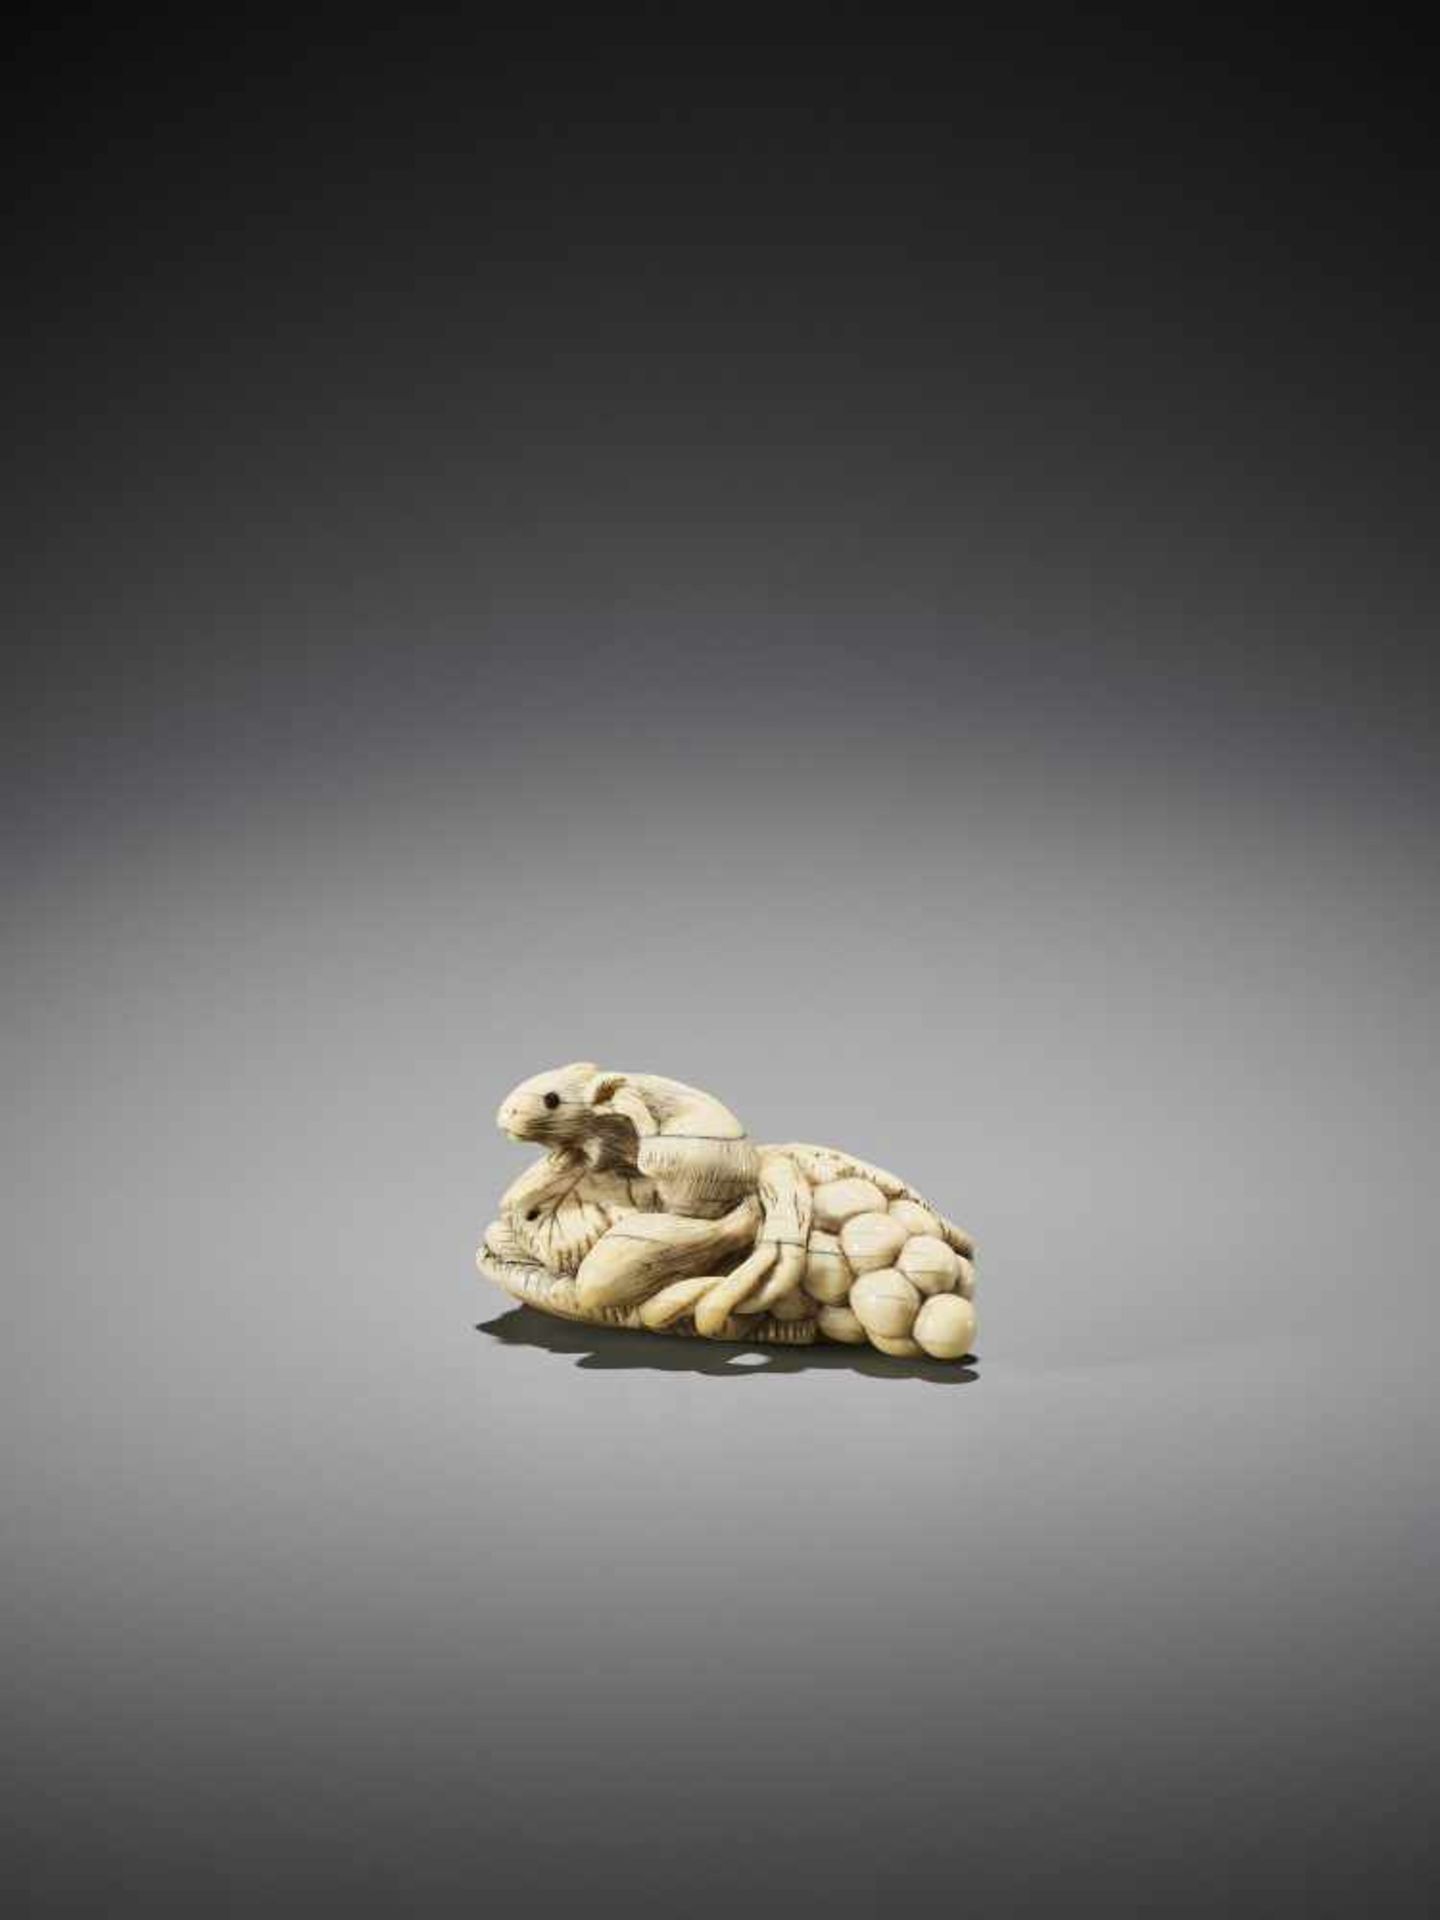 AN IVORY NETSUKE OF A SQUIRELL AND GRAPES - Image 2 of 10